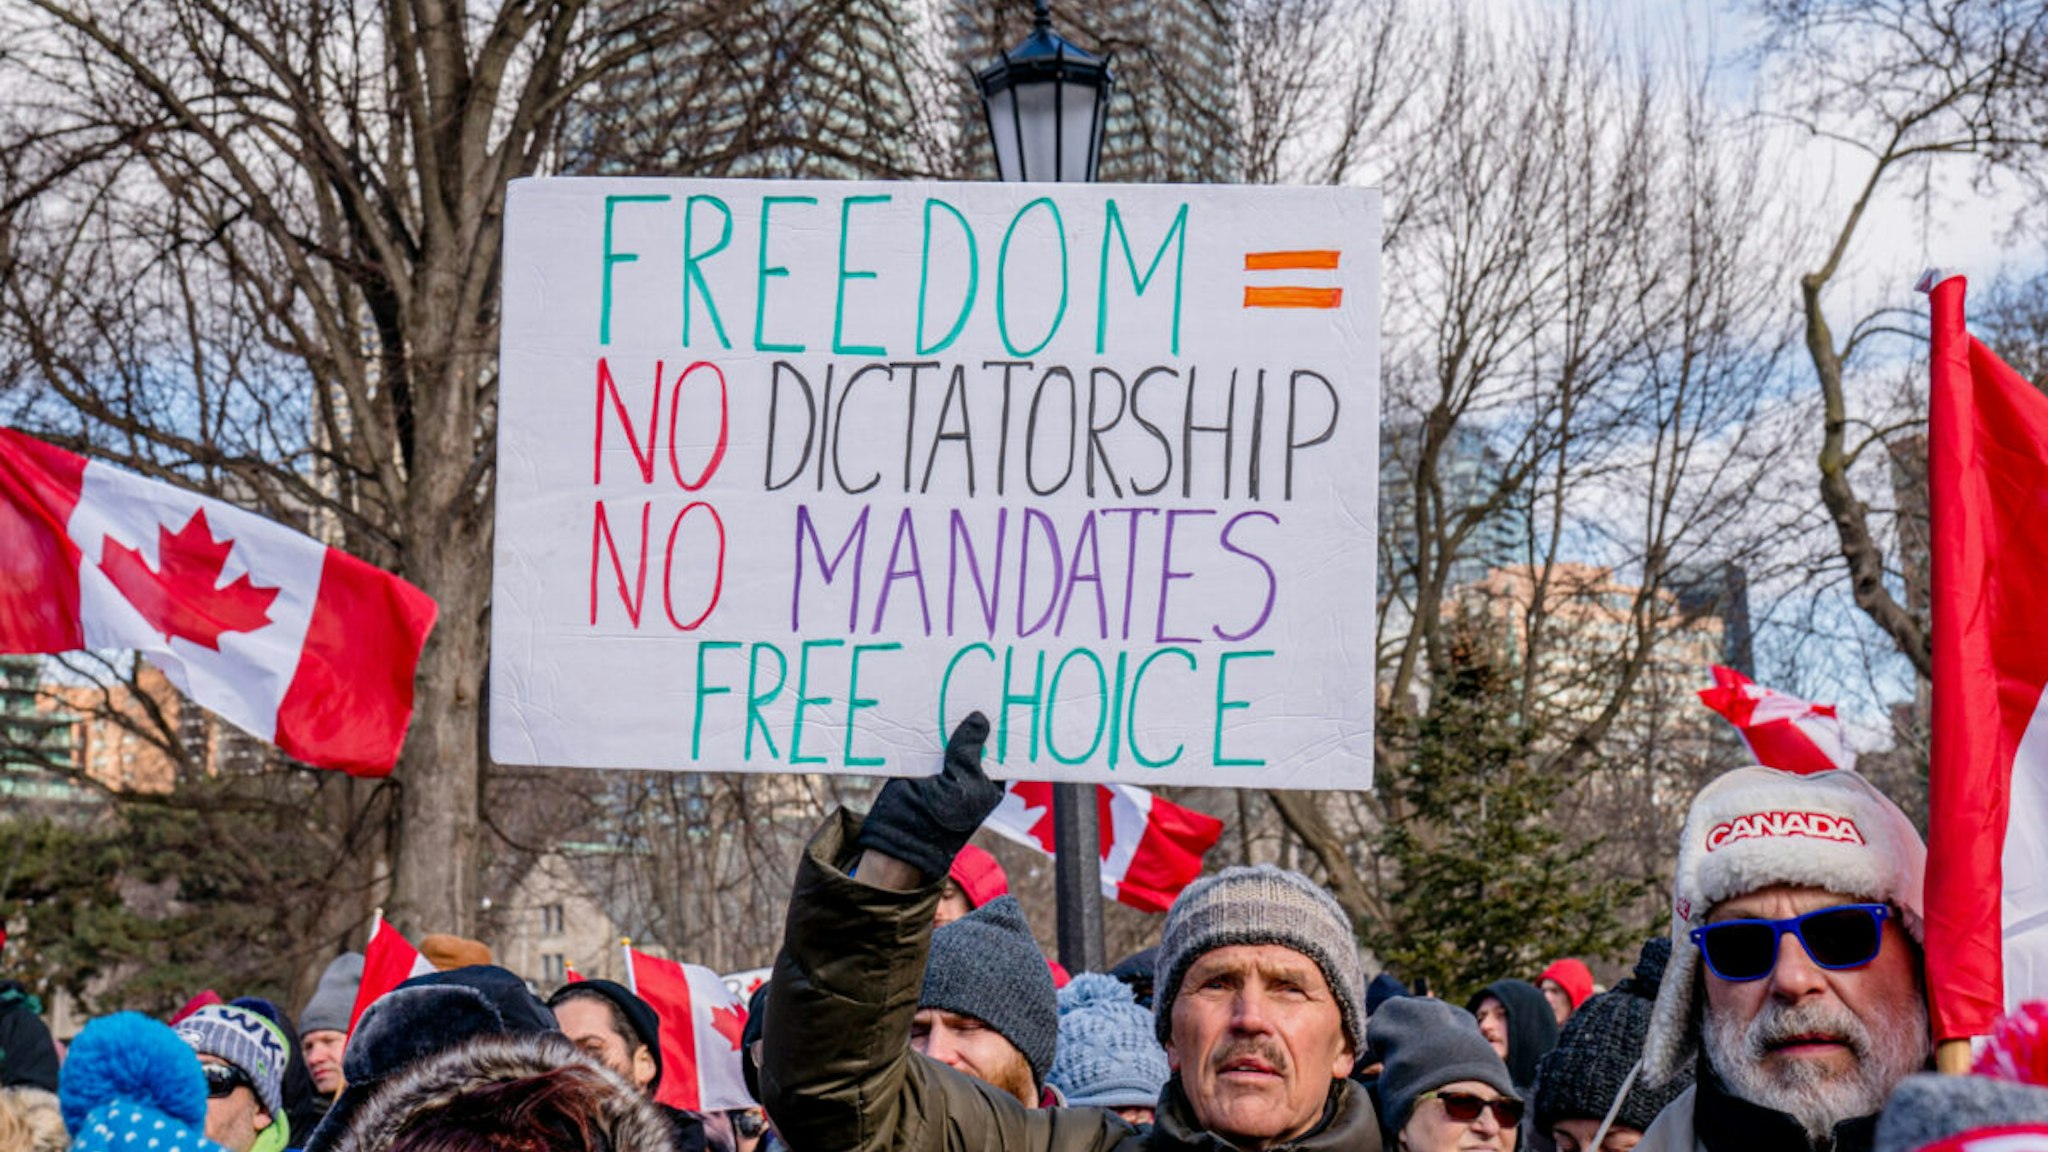 A protester holds a sign that says Freedom = No dictatorship, no mandates free choice during the Anti-Vaccine Mandate rally.